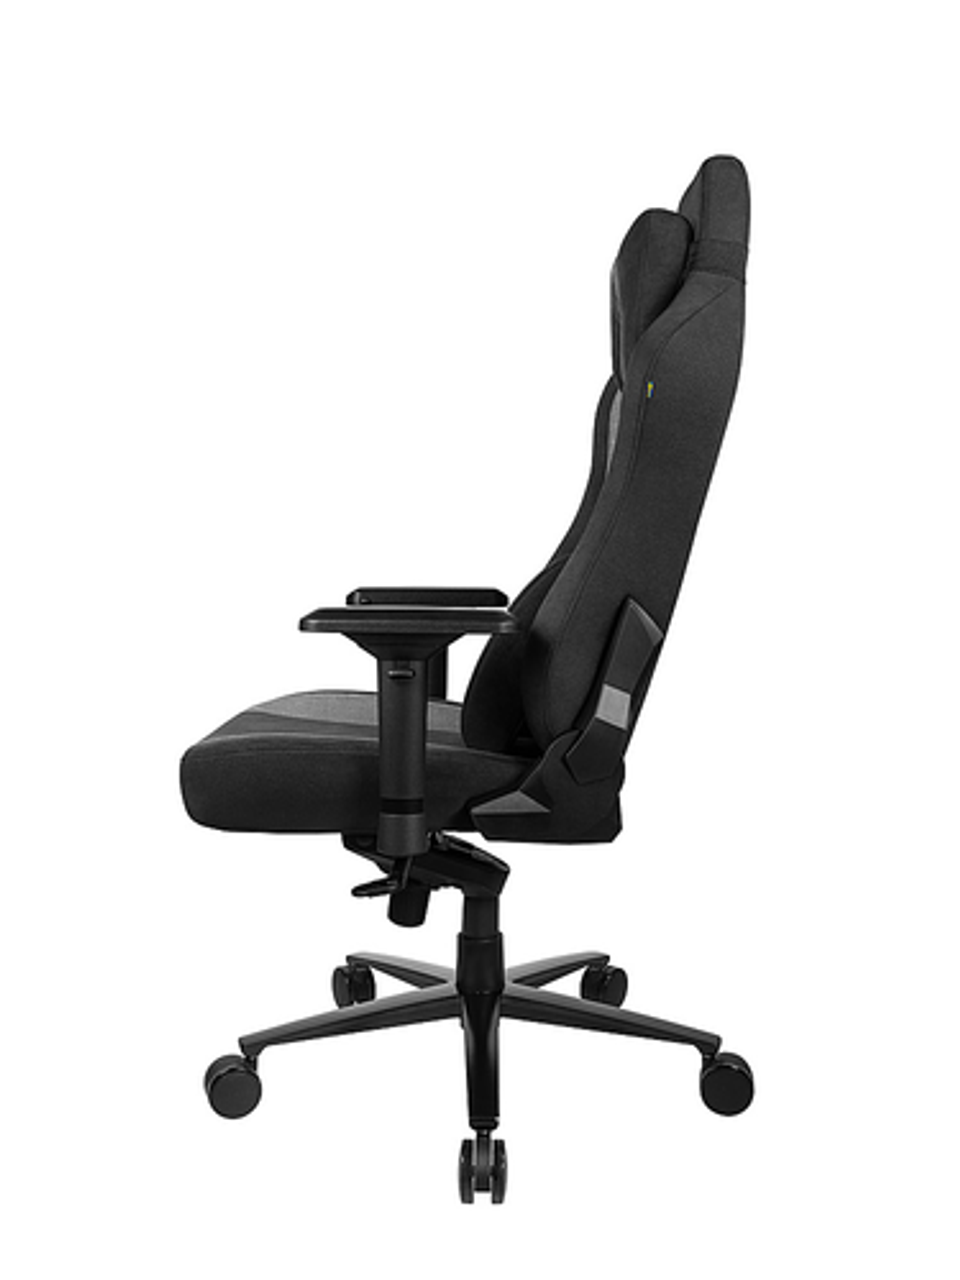 Arozzi - Vernazza Series Top-Tier Premium Supersoft Upholstery Fabric Office/Gaming Chair - Black